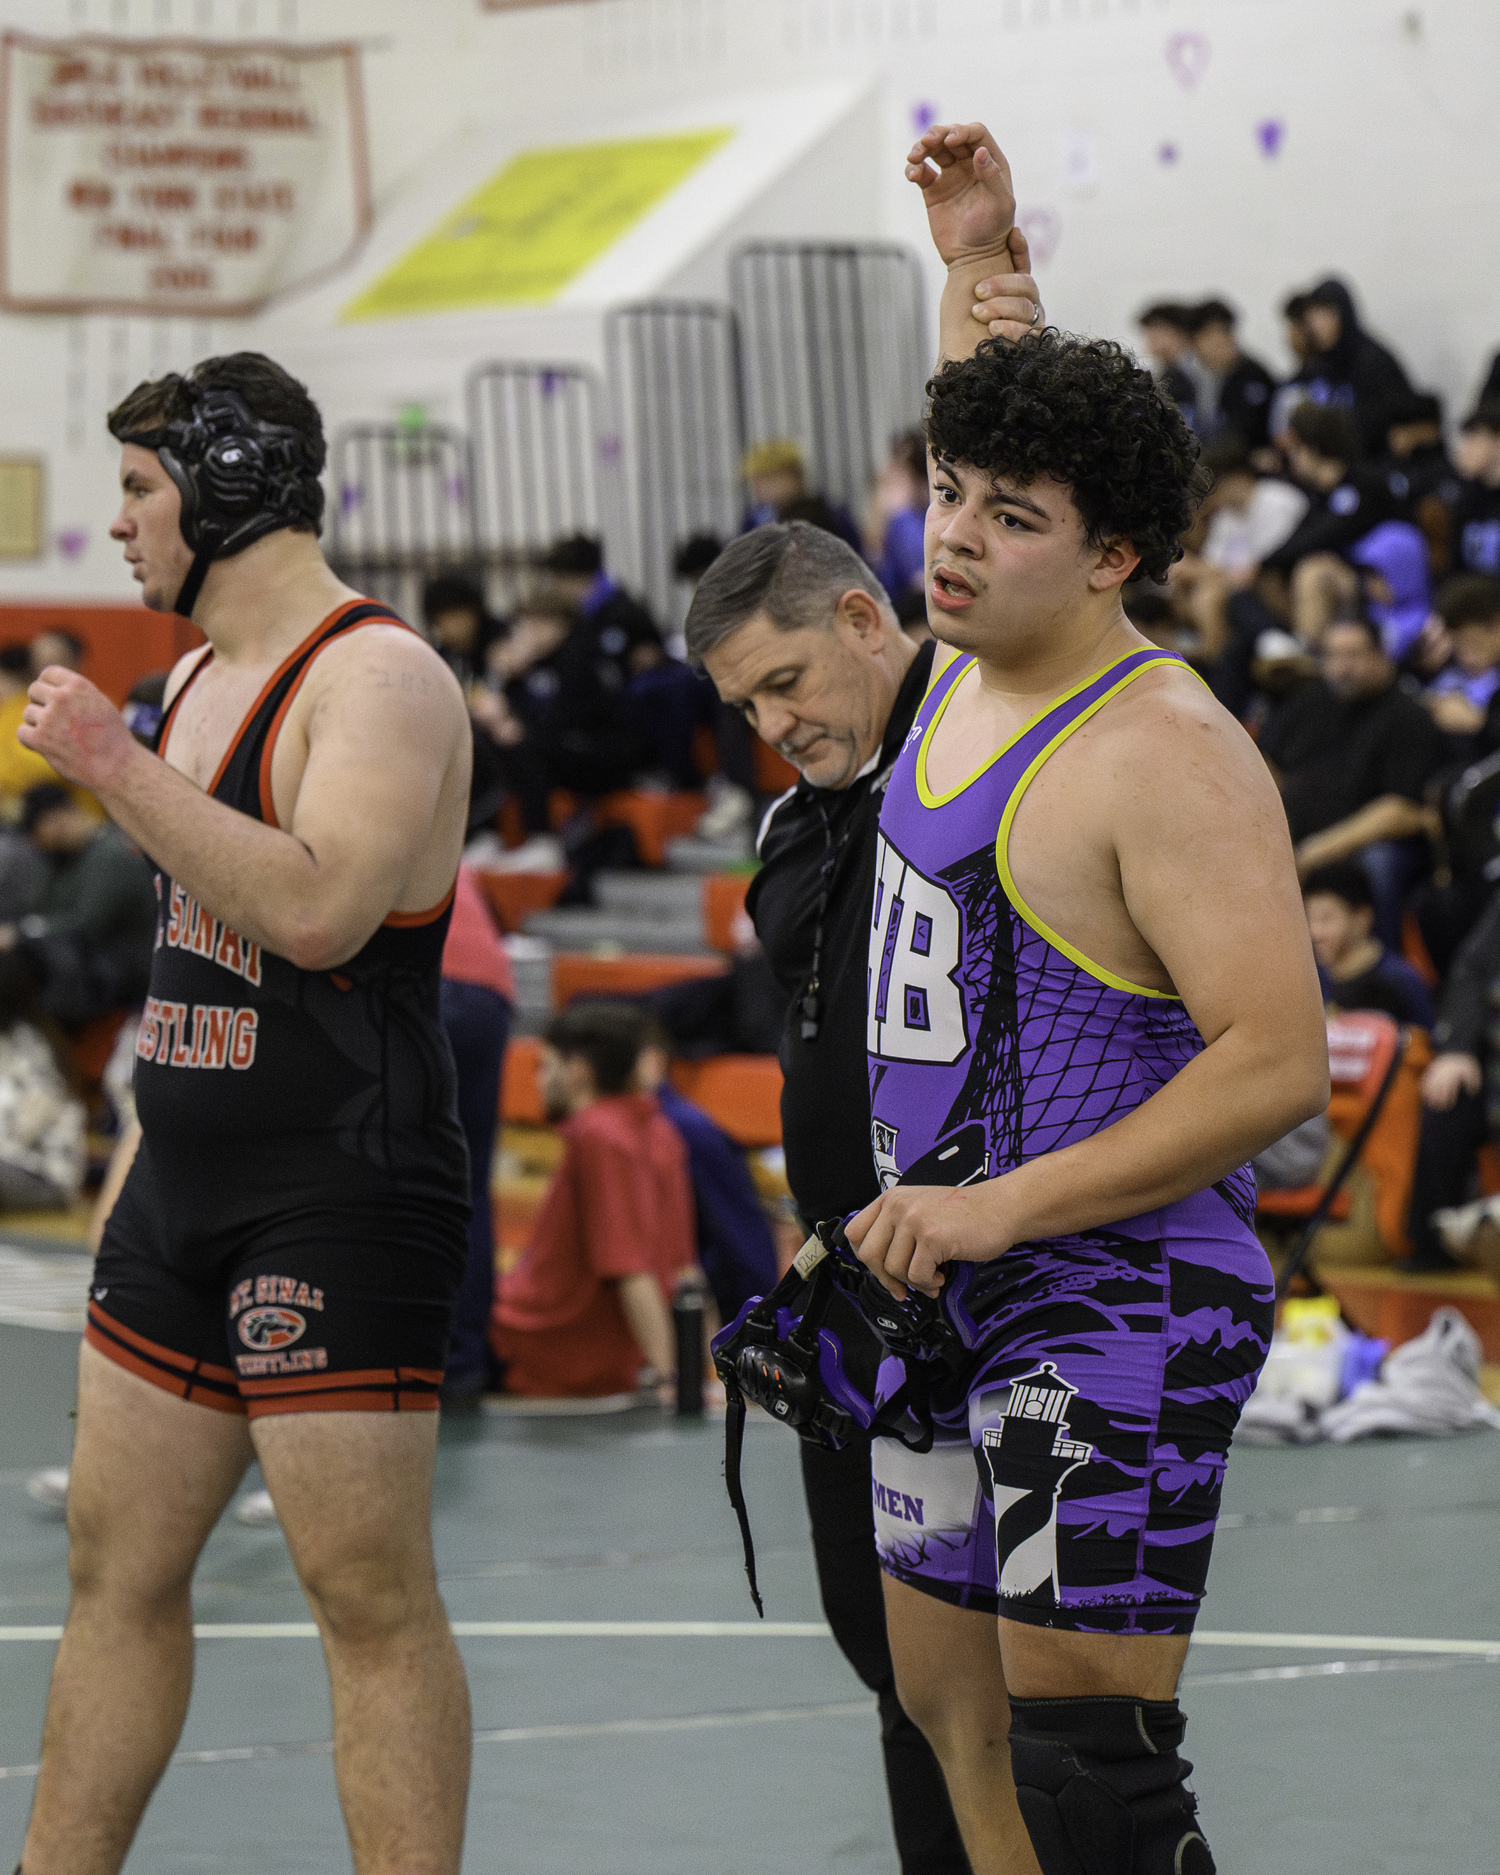 Michael Gutierrez of Hampton Bays gets his arm raised after defeating Mount Sinai's Devin Champaine in the consolation semifinals.   MARIANNE BARNETT